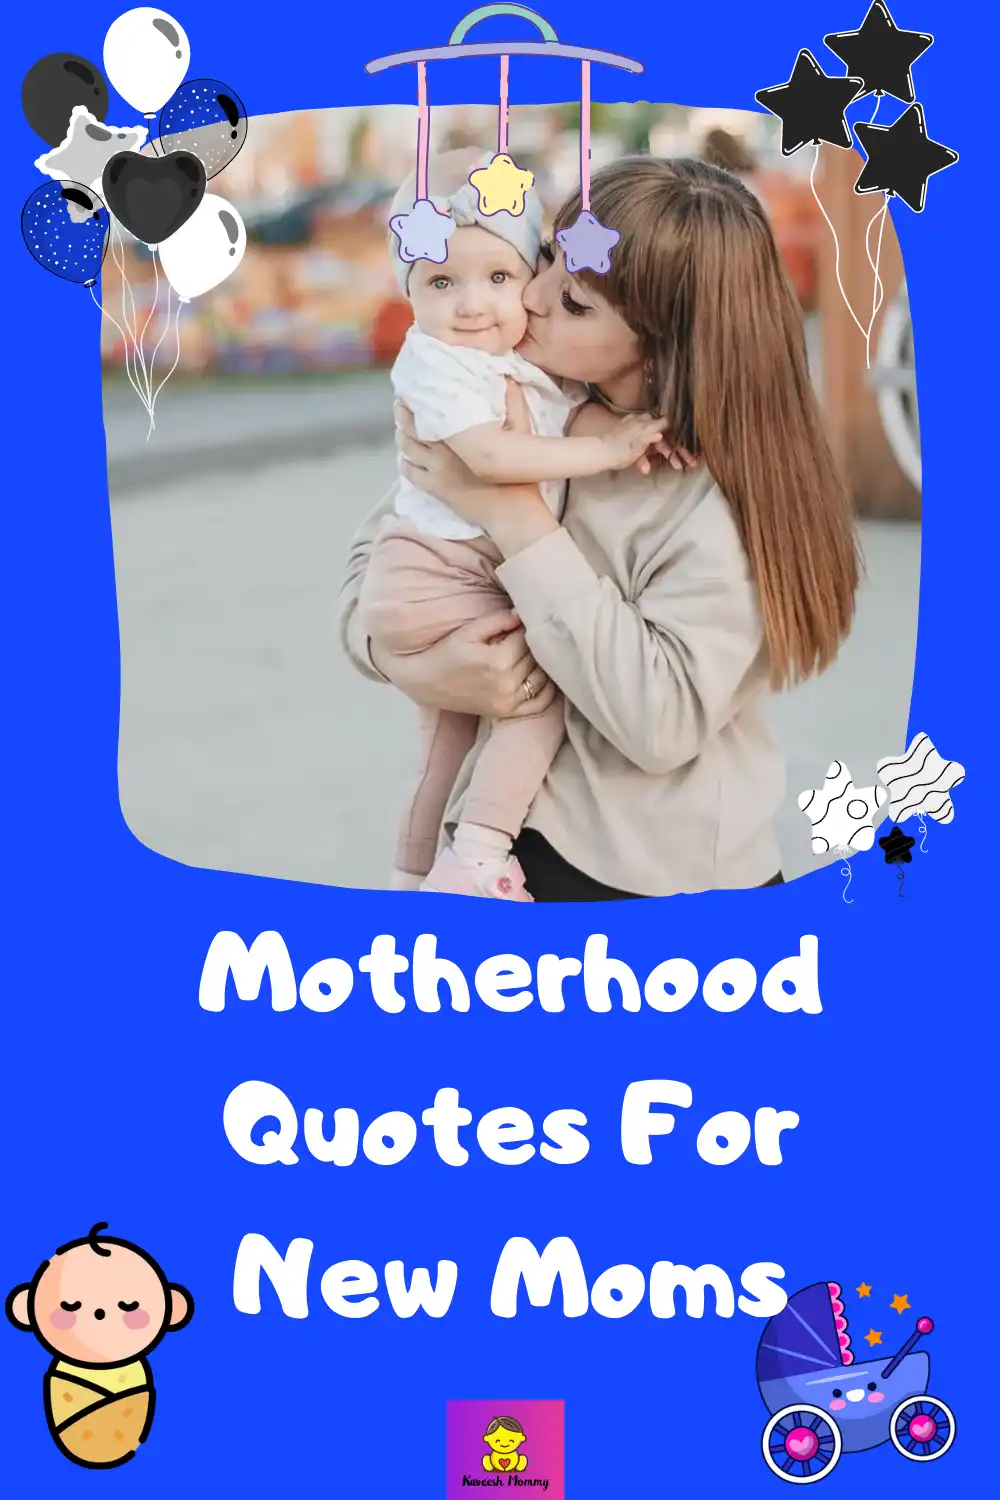 50+ BEST MOTHERHOOD QUOTES TO INSPIRE NEW MOM  -KAVESH MOMMY 